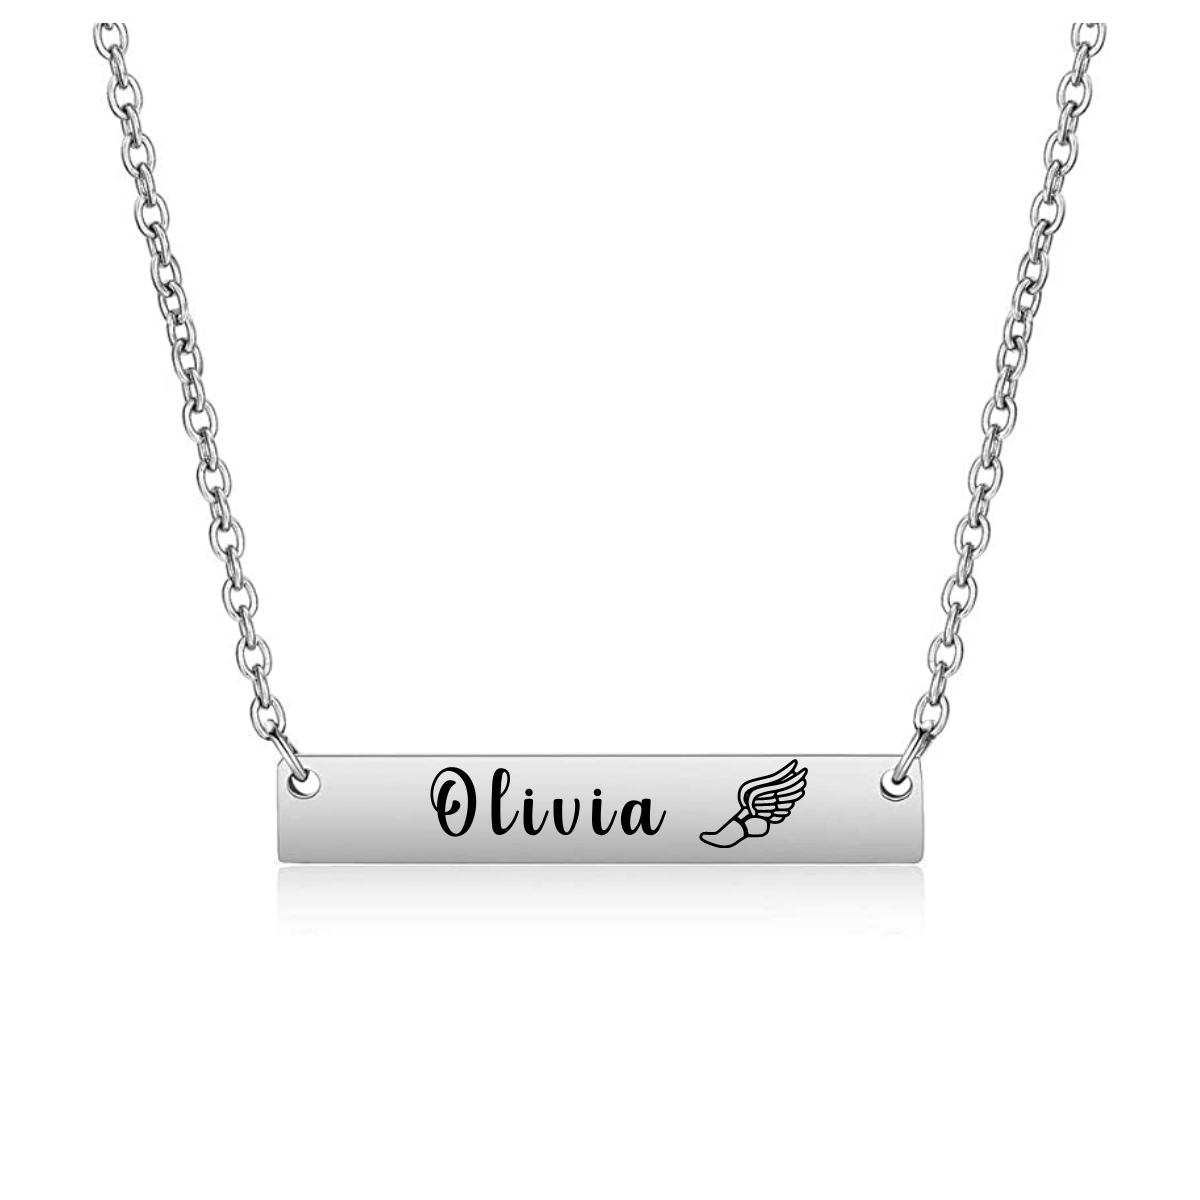 Personalized Running Track and Field Bar Necklace